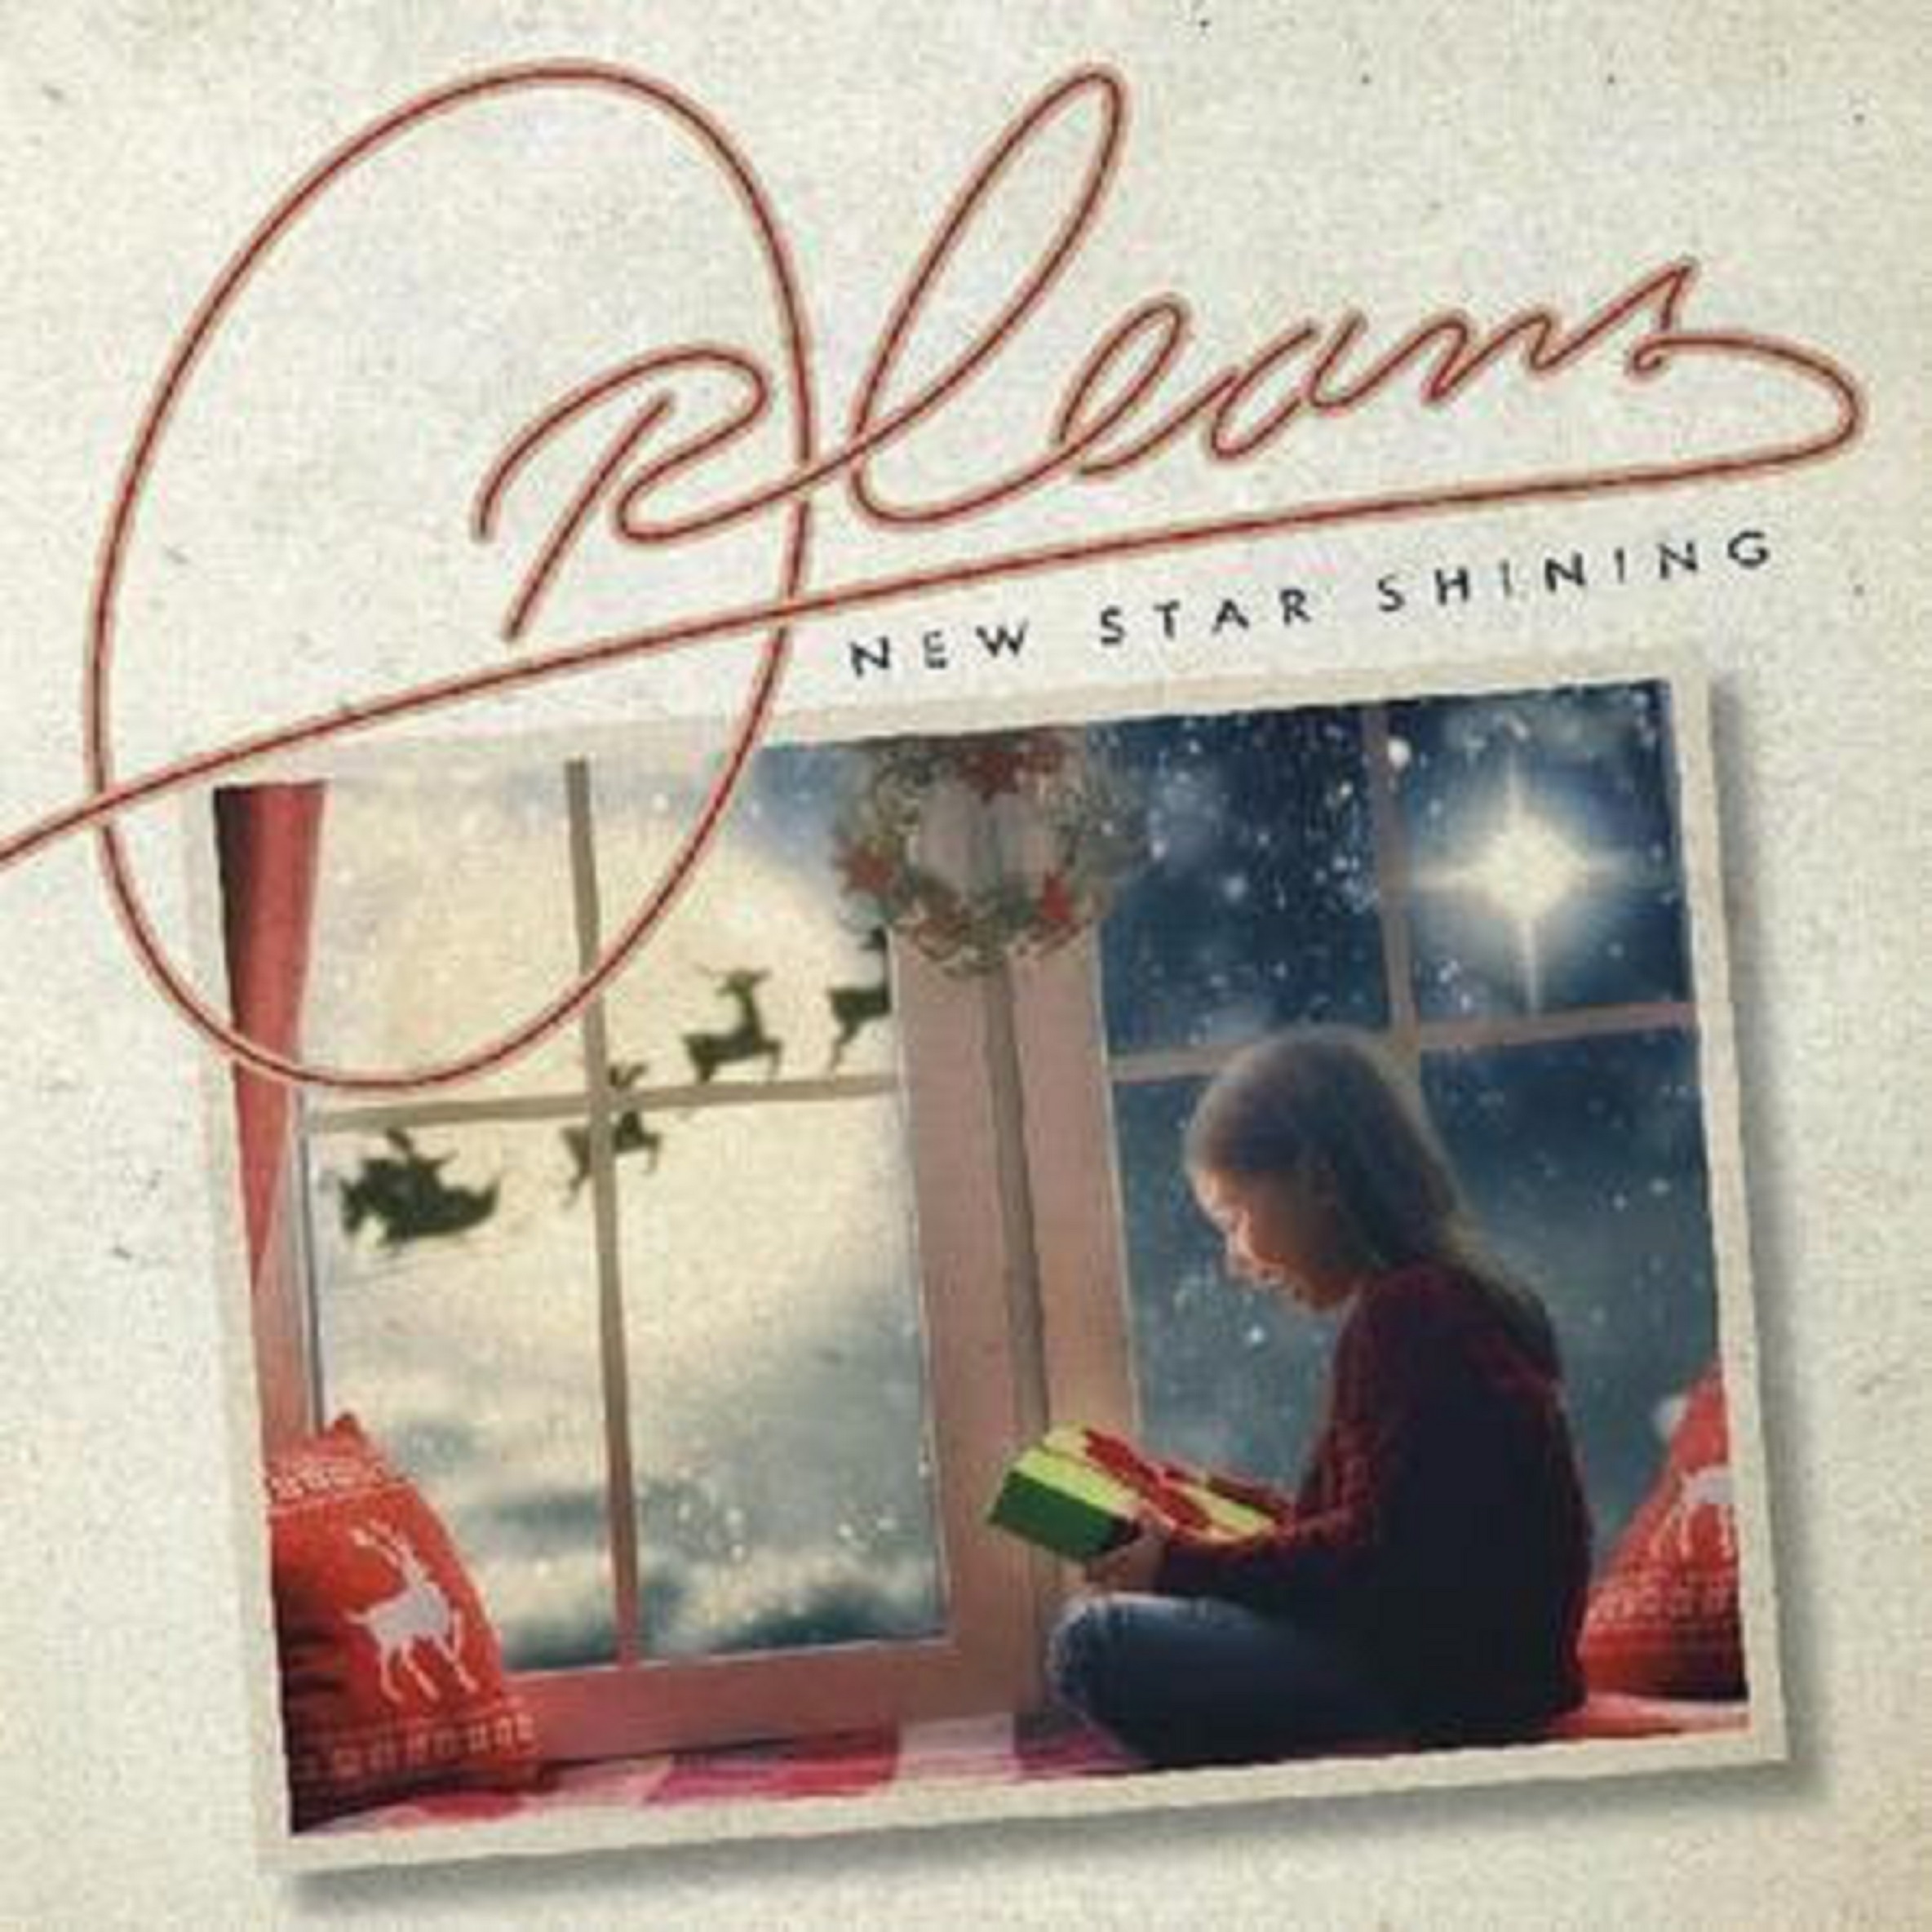 Orleans Celebrates Christmas With New Album, “New Star Shining”